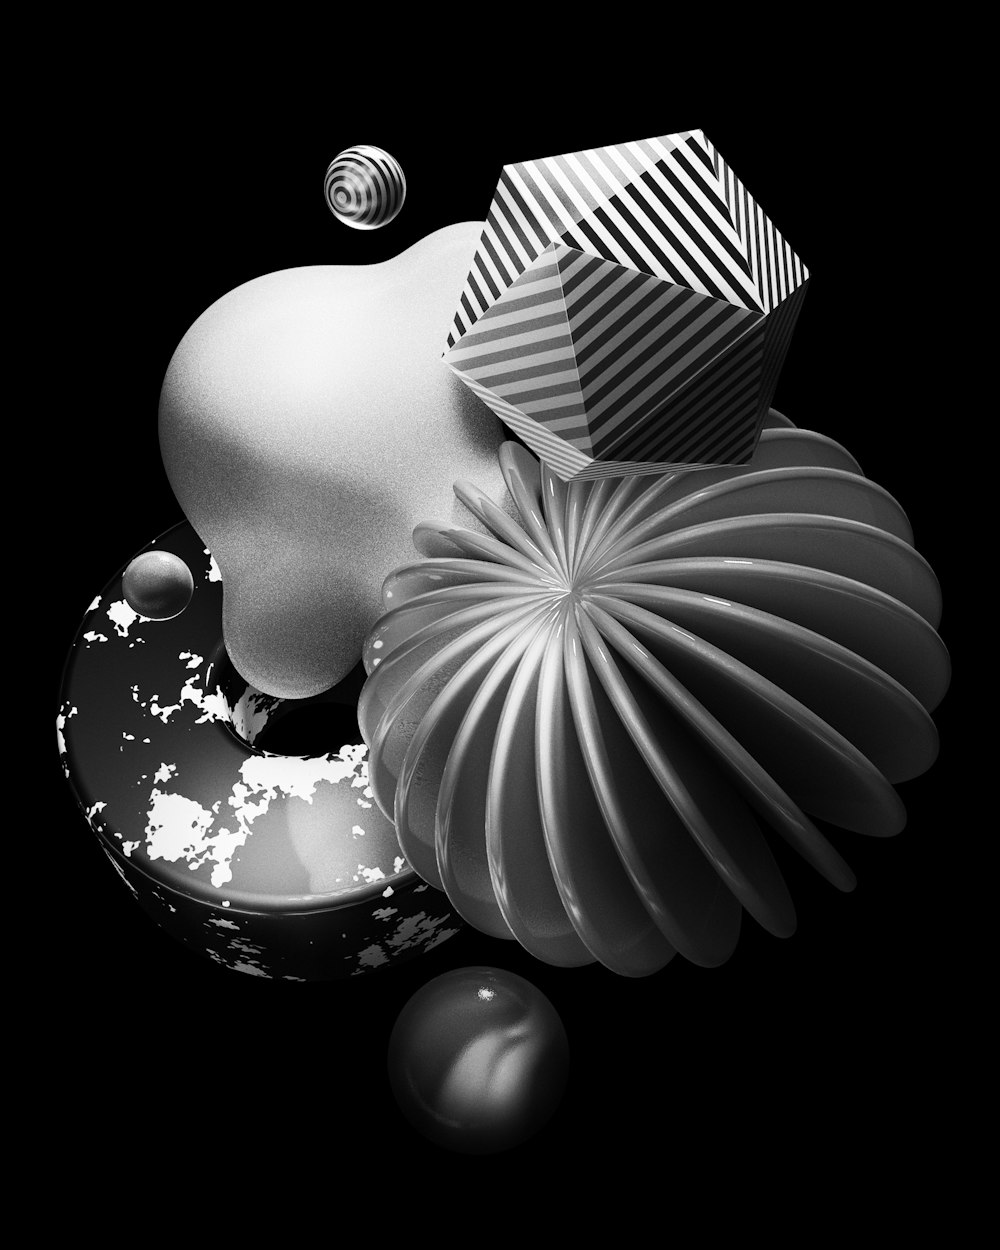 a black and white photo of a vase and some balls